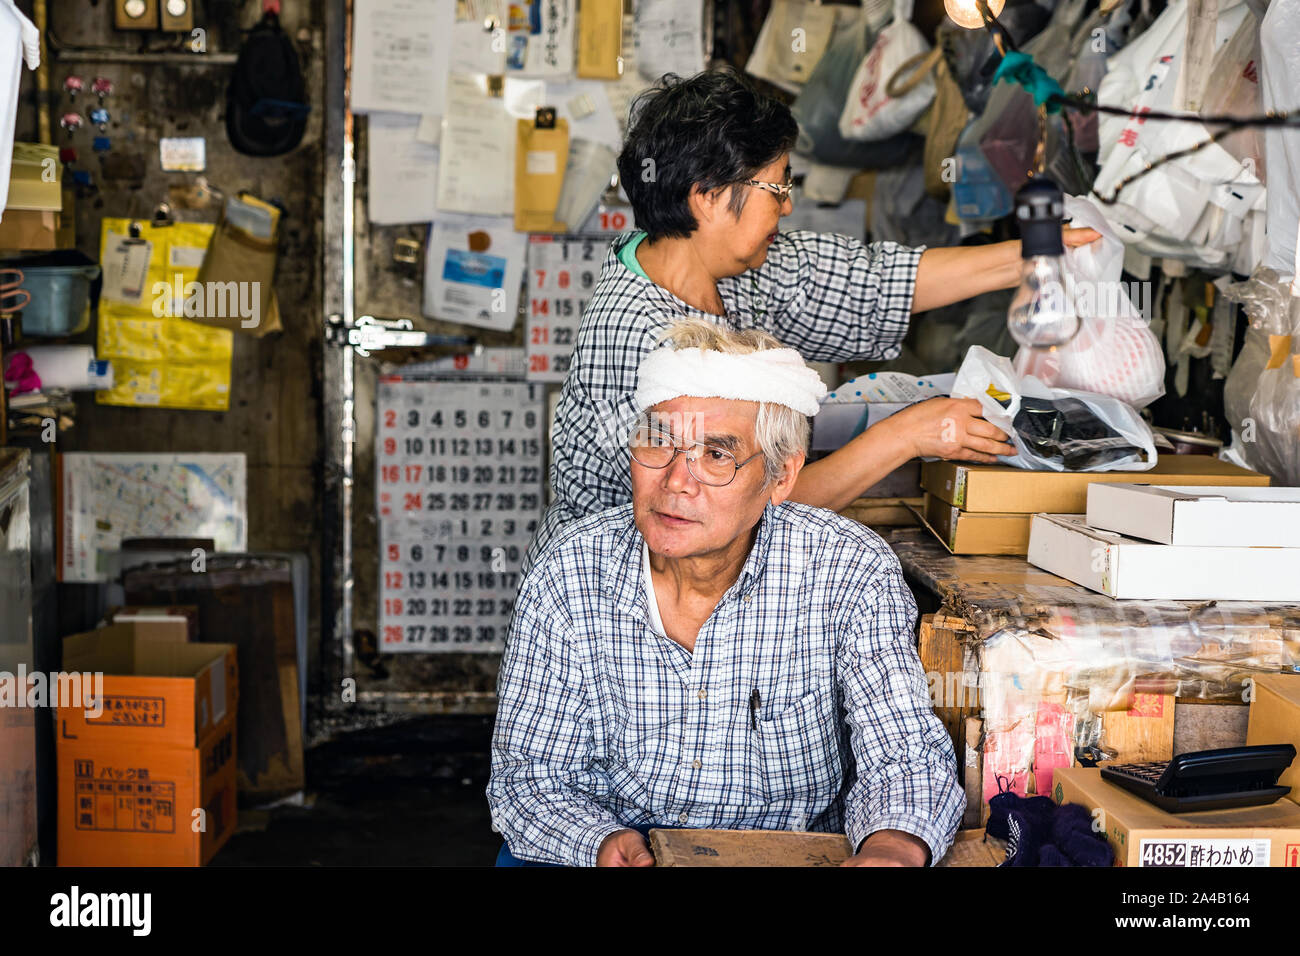 TOKYO, JAPAN - OCTOBER 6, 2018. The Asian Couple Does Family Business. Japanese Man And Woman Are Doing Home Work At Their Shop. Stock Photo